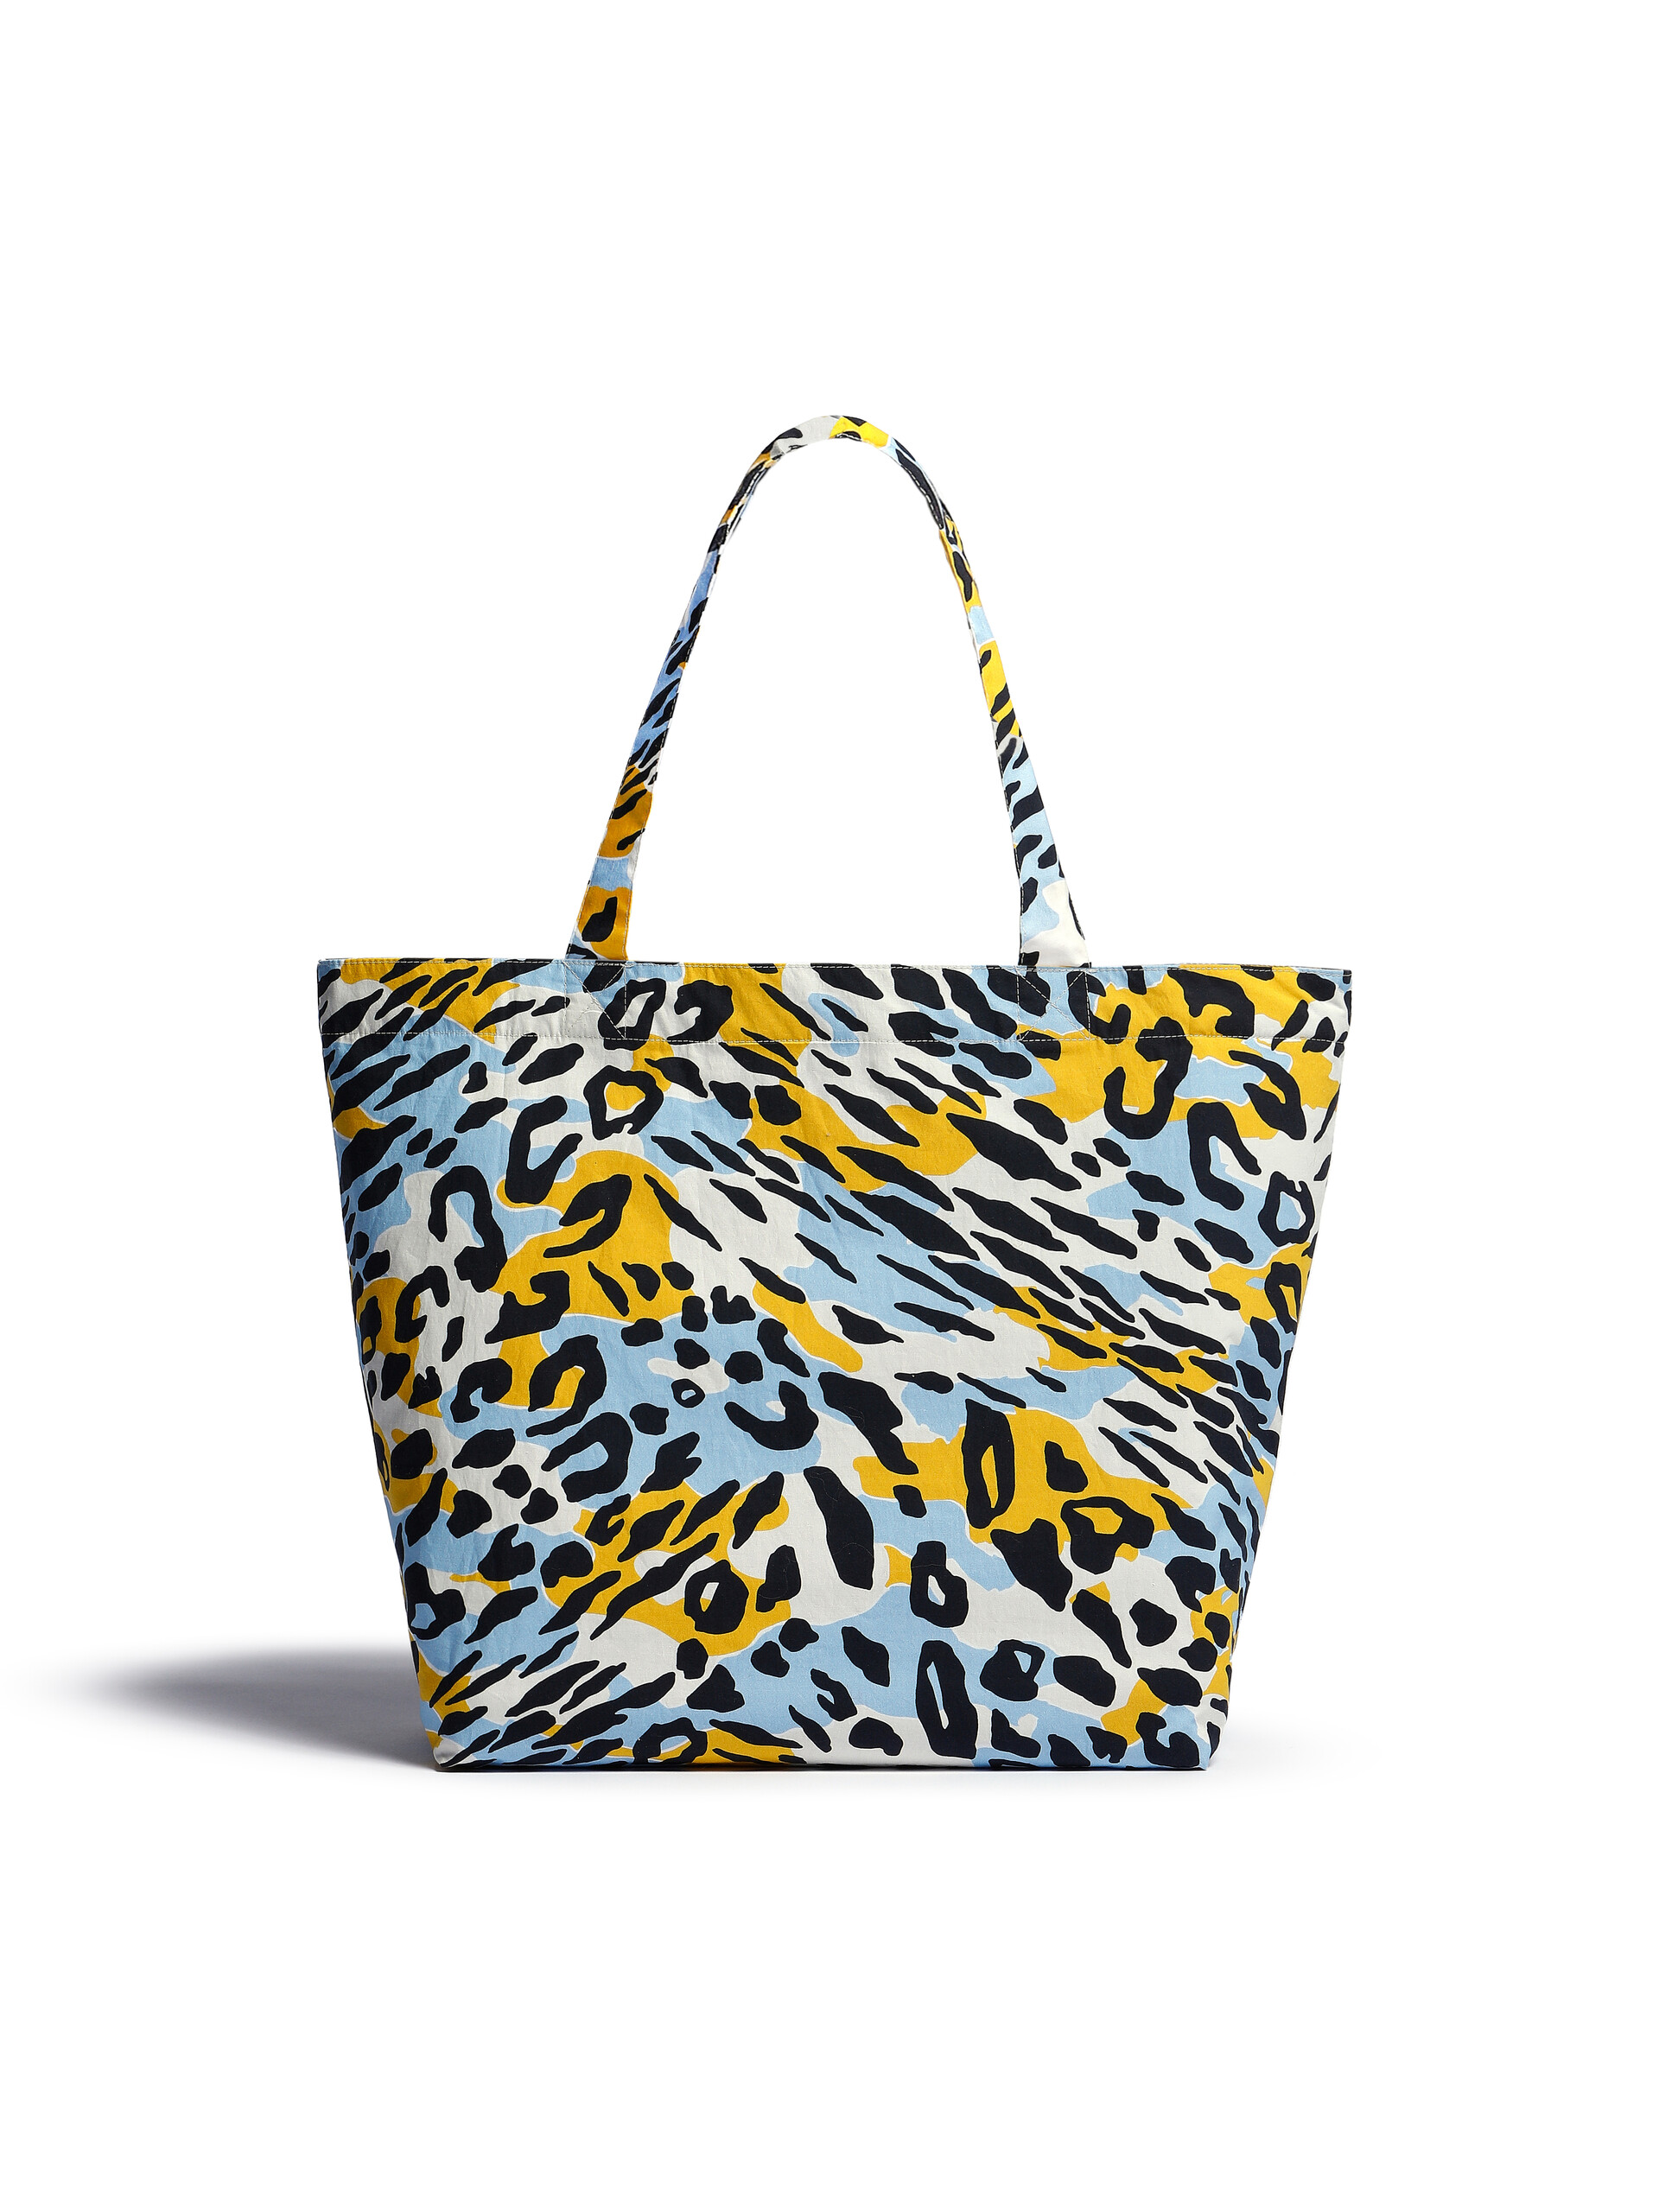 Cotton tote bag with archival black spotted print - Shopping Bags - Image 3